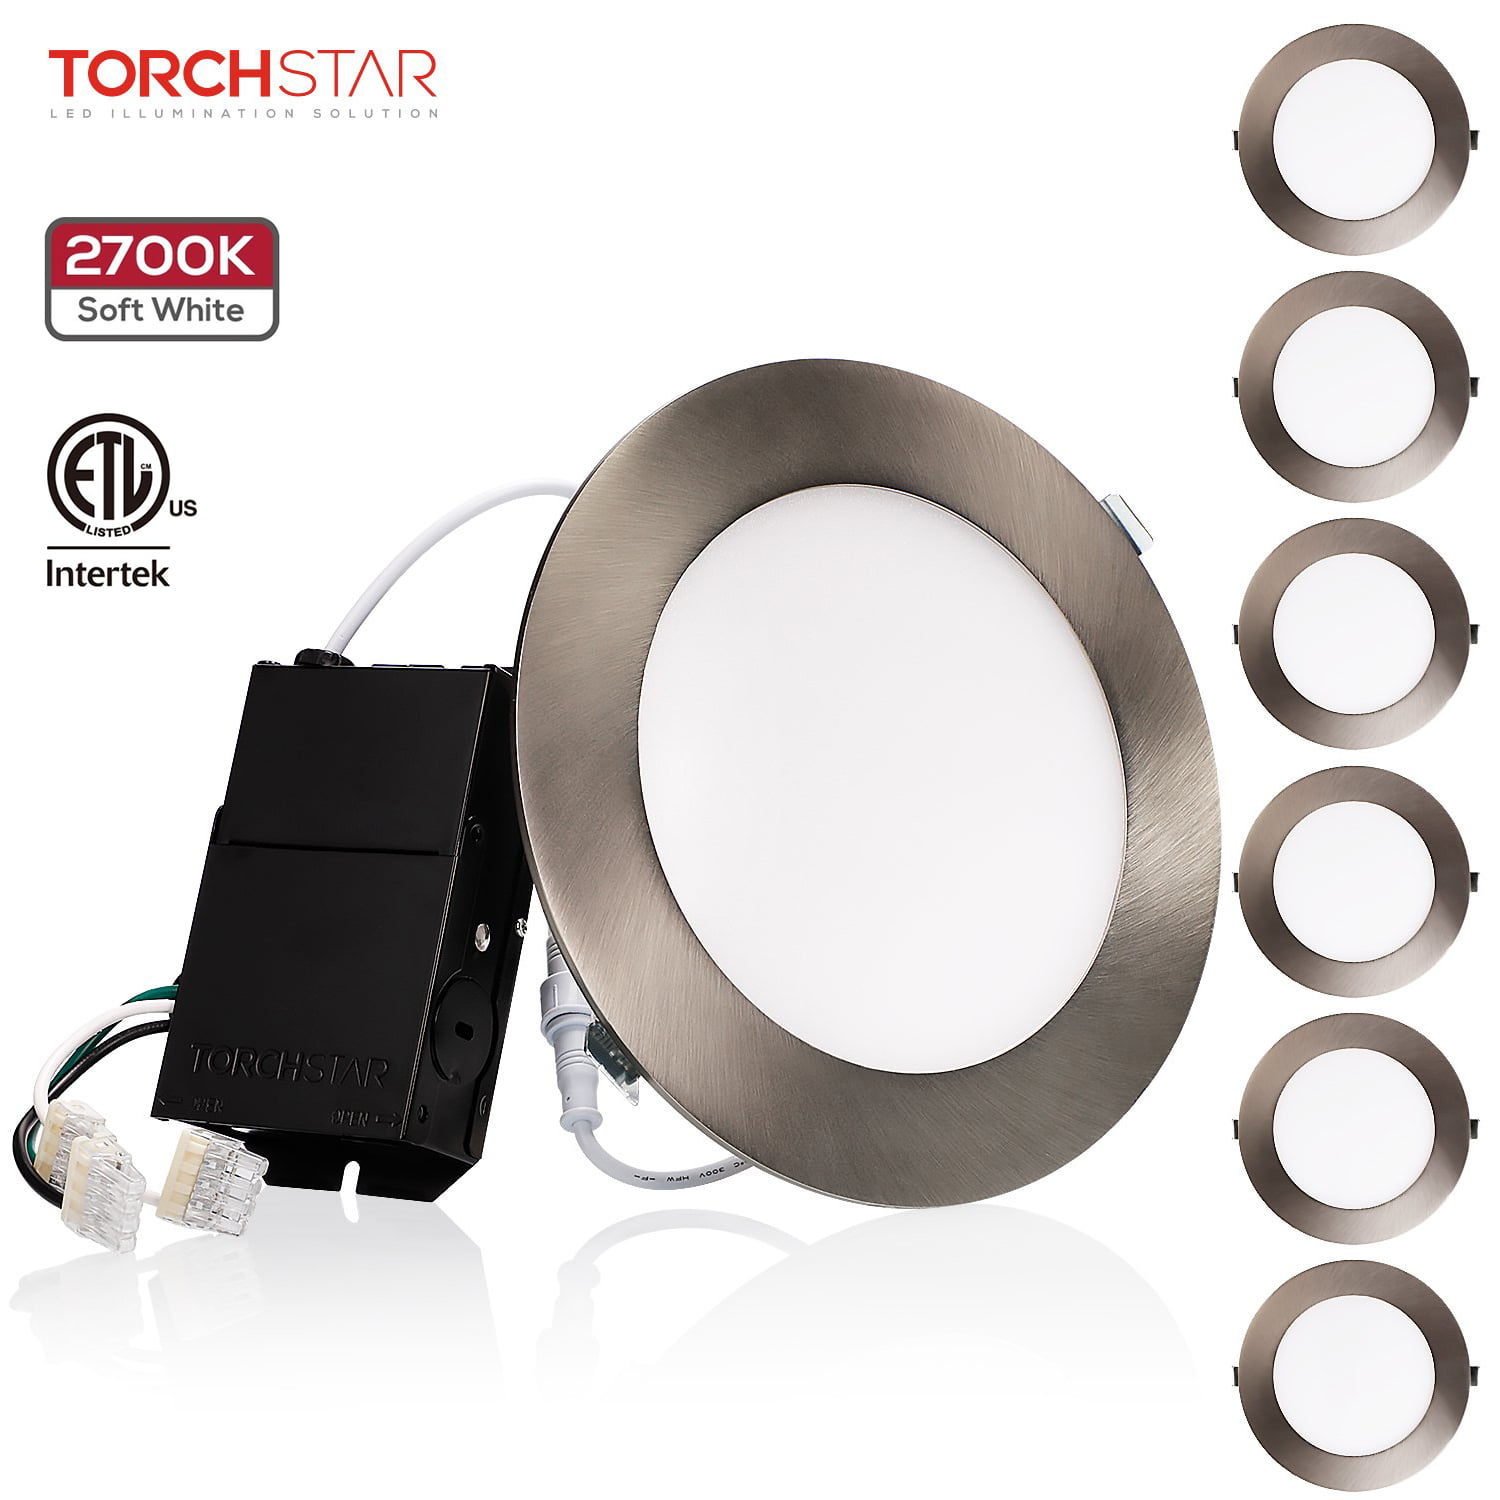 2700K Soft White 90W Eqv. TORCHSTAR 12-Pack 5-6 Inch Dimmable Recessed LED Downlight with Smooth Trim ETL CRI 90 5 Years Warranty 1250lm Retrofit Lighting 15W 